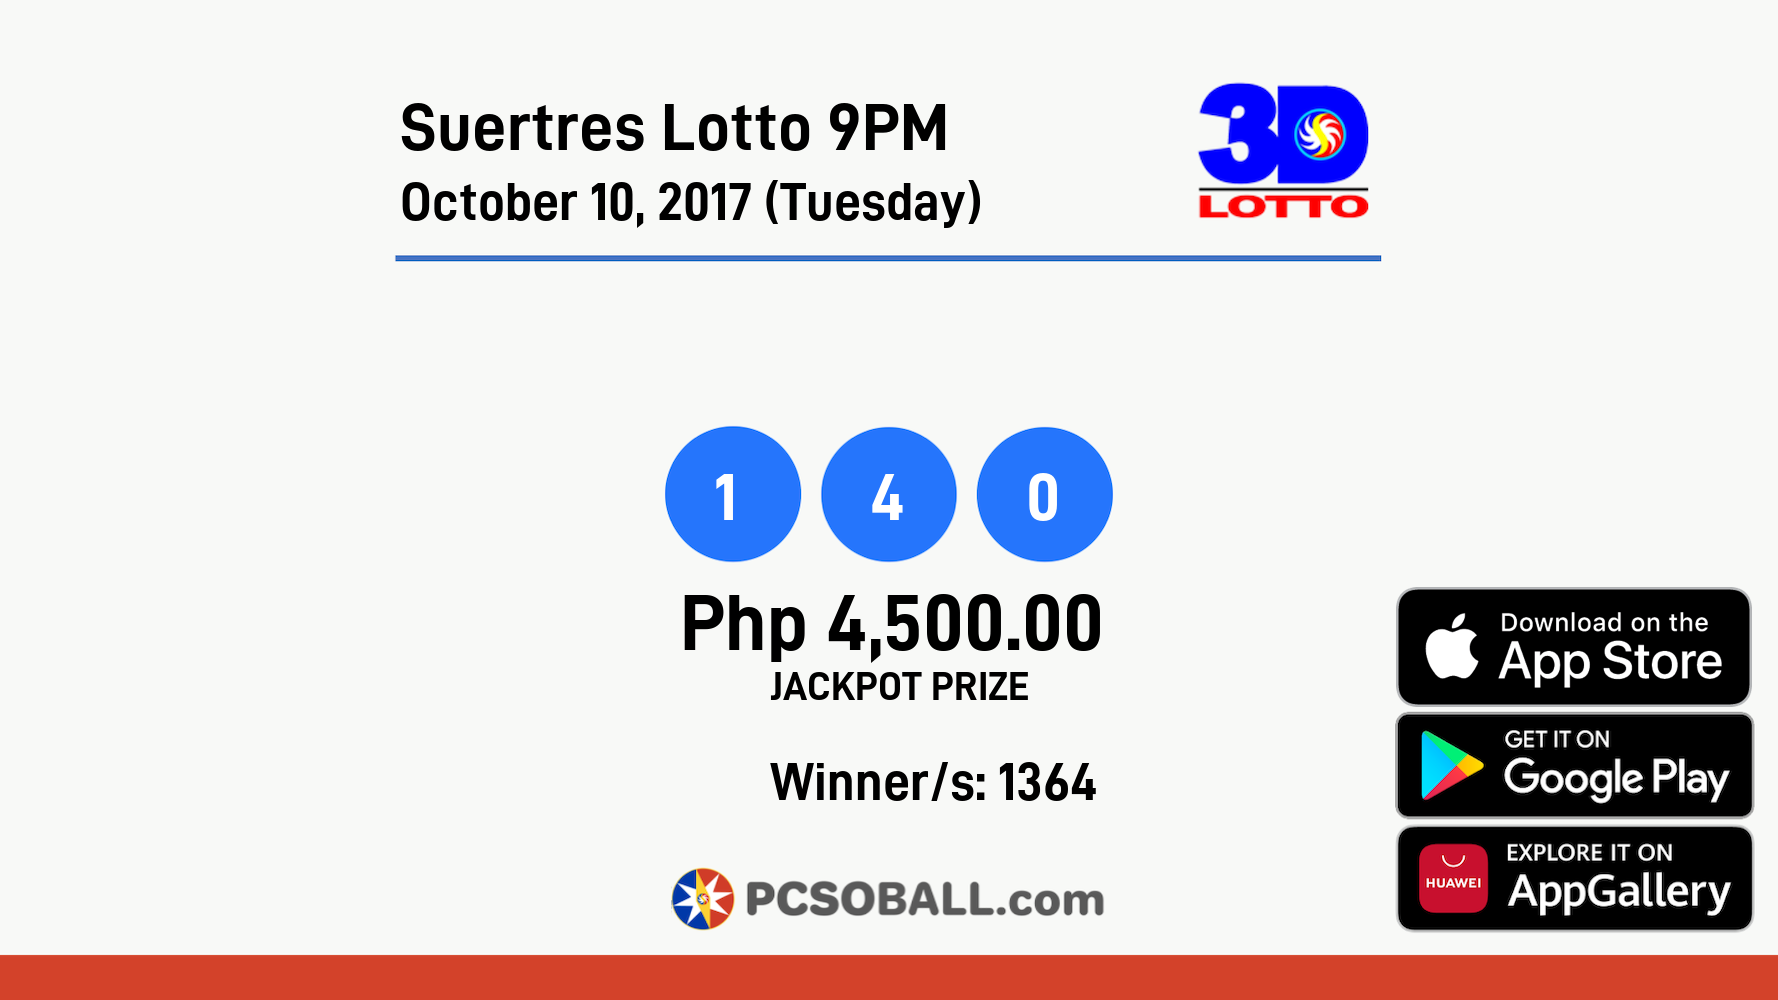 Suertres Lotto 9PM October 10, 2017 (Tuesday) Result